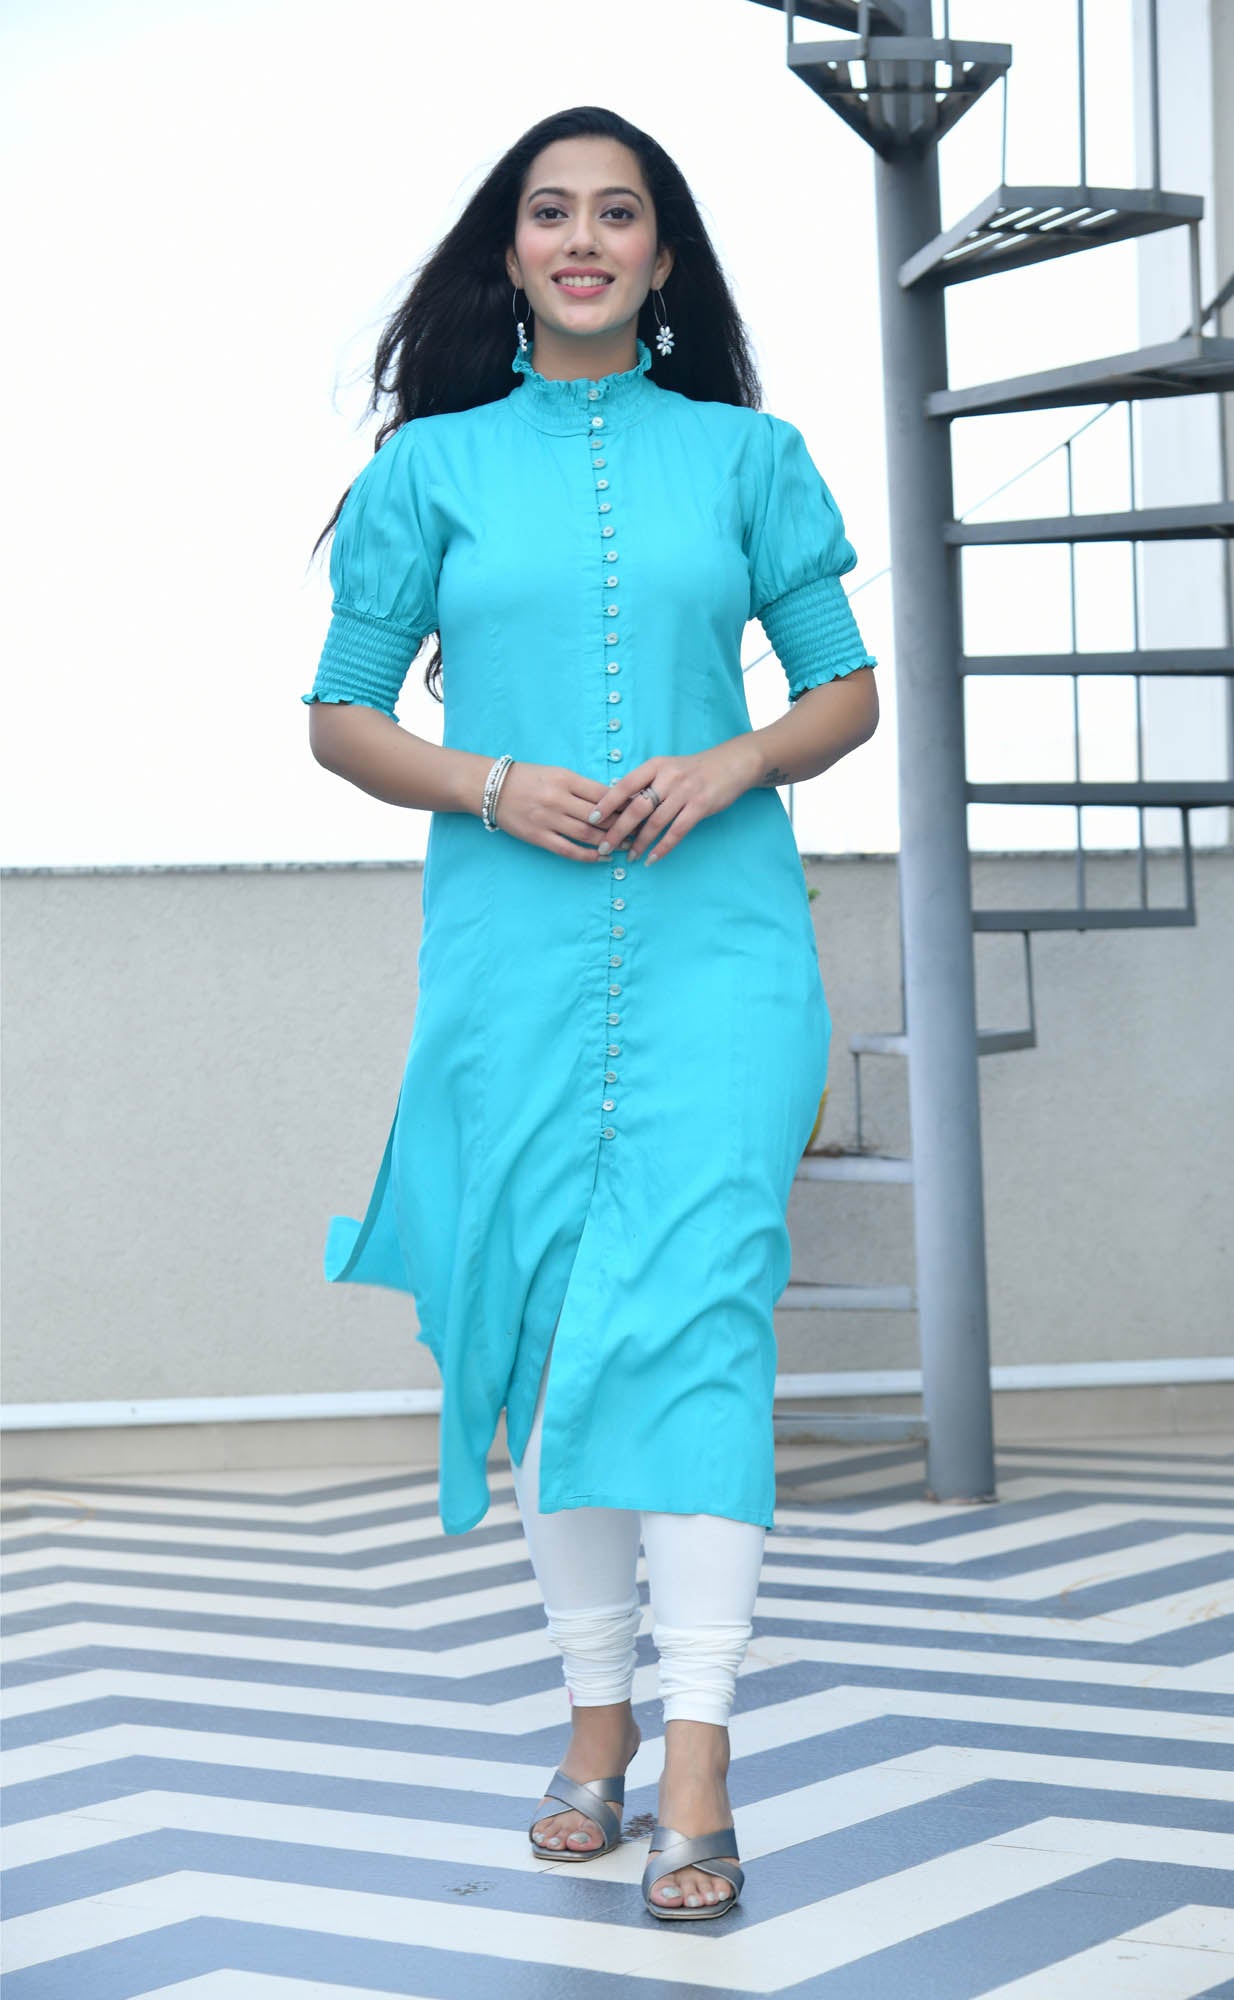 Buy Latest Collection of Kurtis & Tops Ethnic Indian wear and Kurtis & Tops  only at Biba India